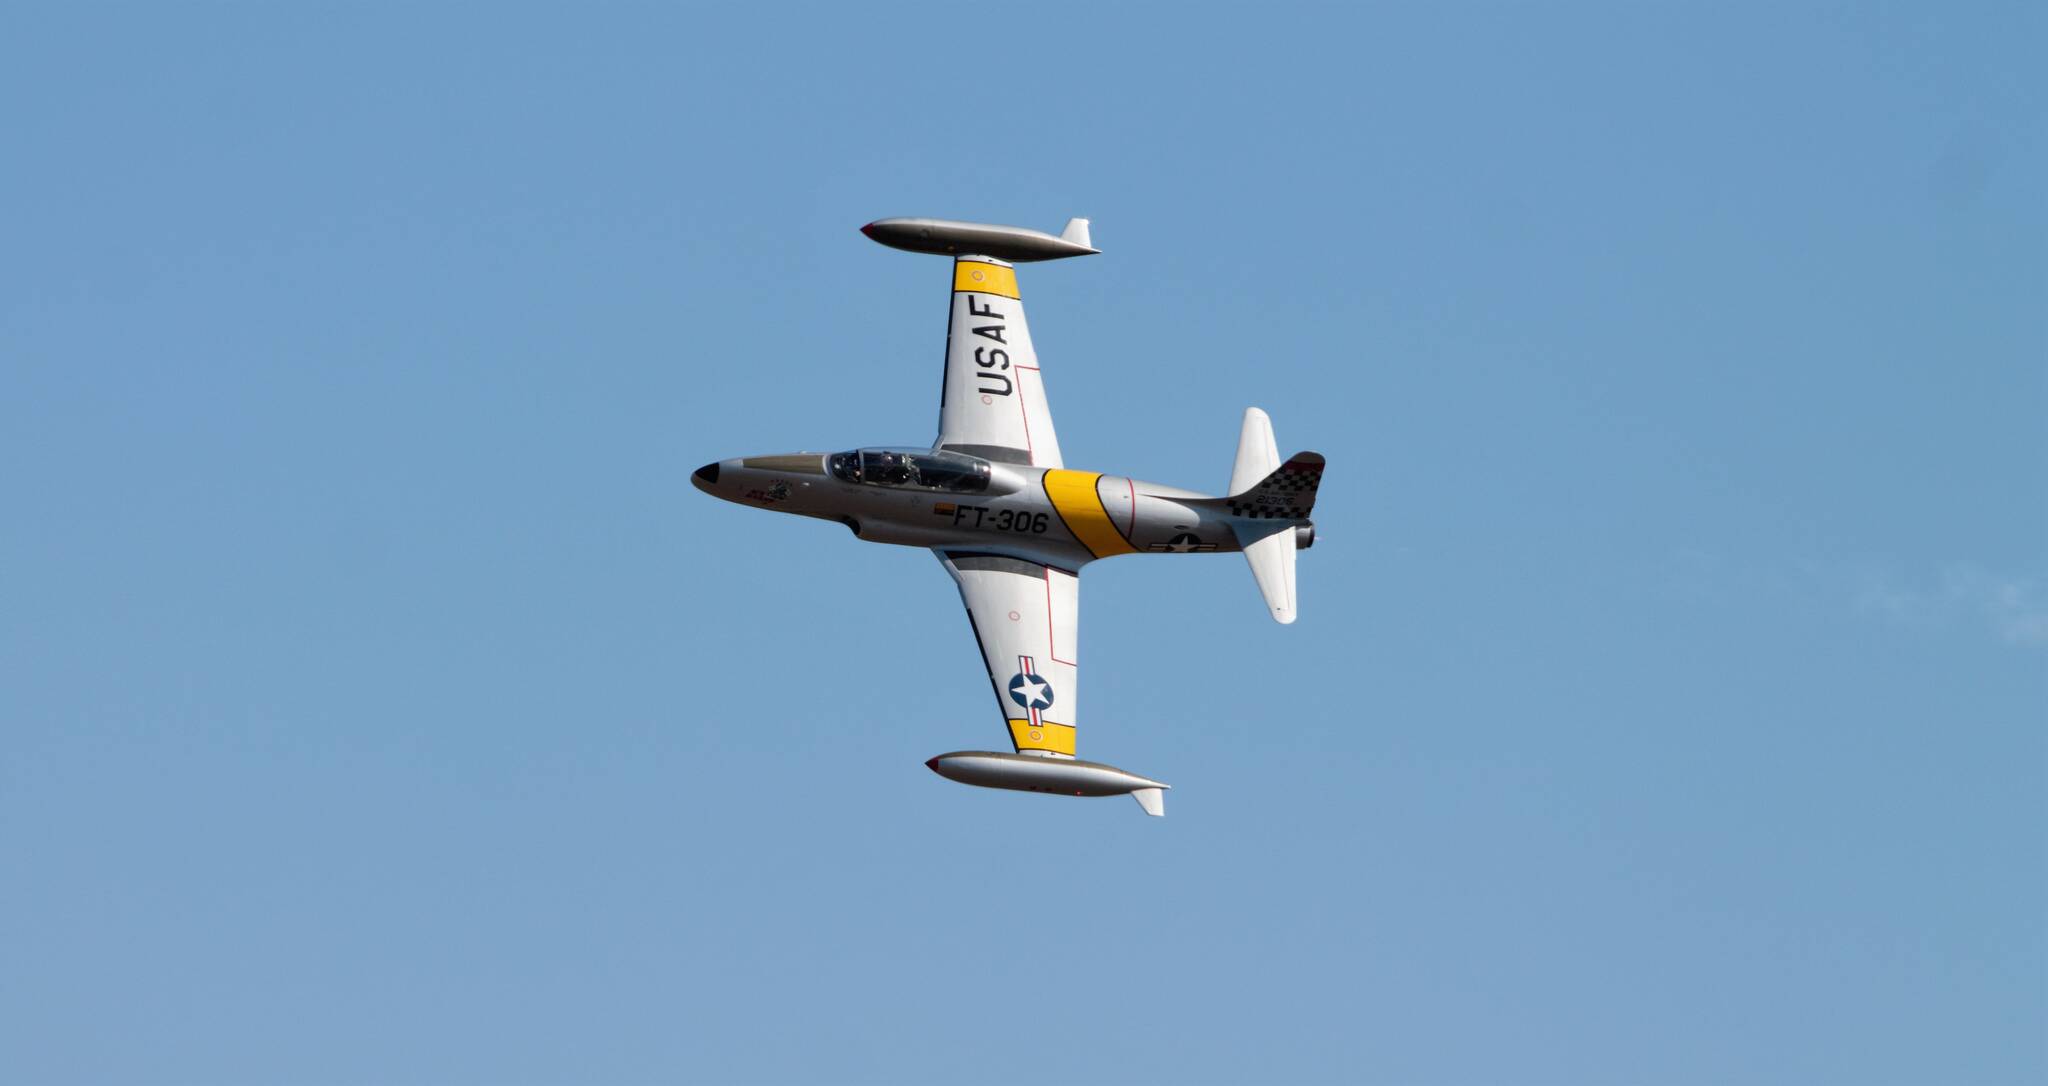 Greg Colyer soars by in a T-33 ‘Shooting Star.’